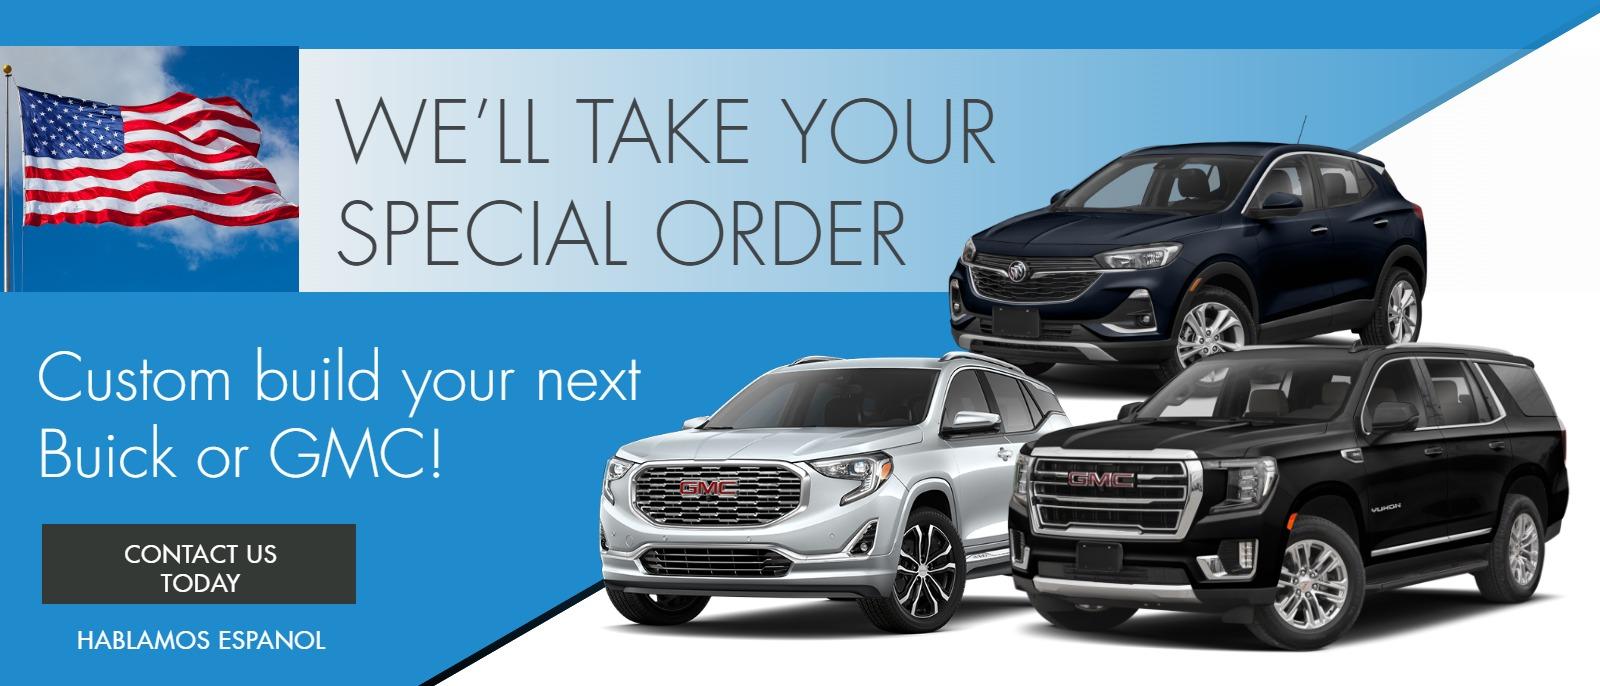 WE'LL TAKE YOUR SPECIAL ORDER
Custom build your next Buick or GMC!
Contact Us Today
Hablamos Espanol